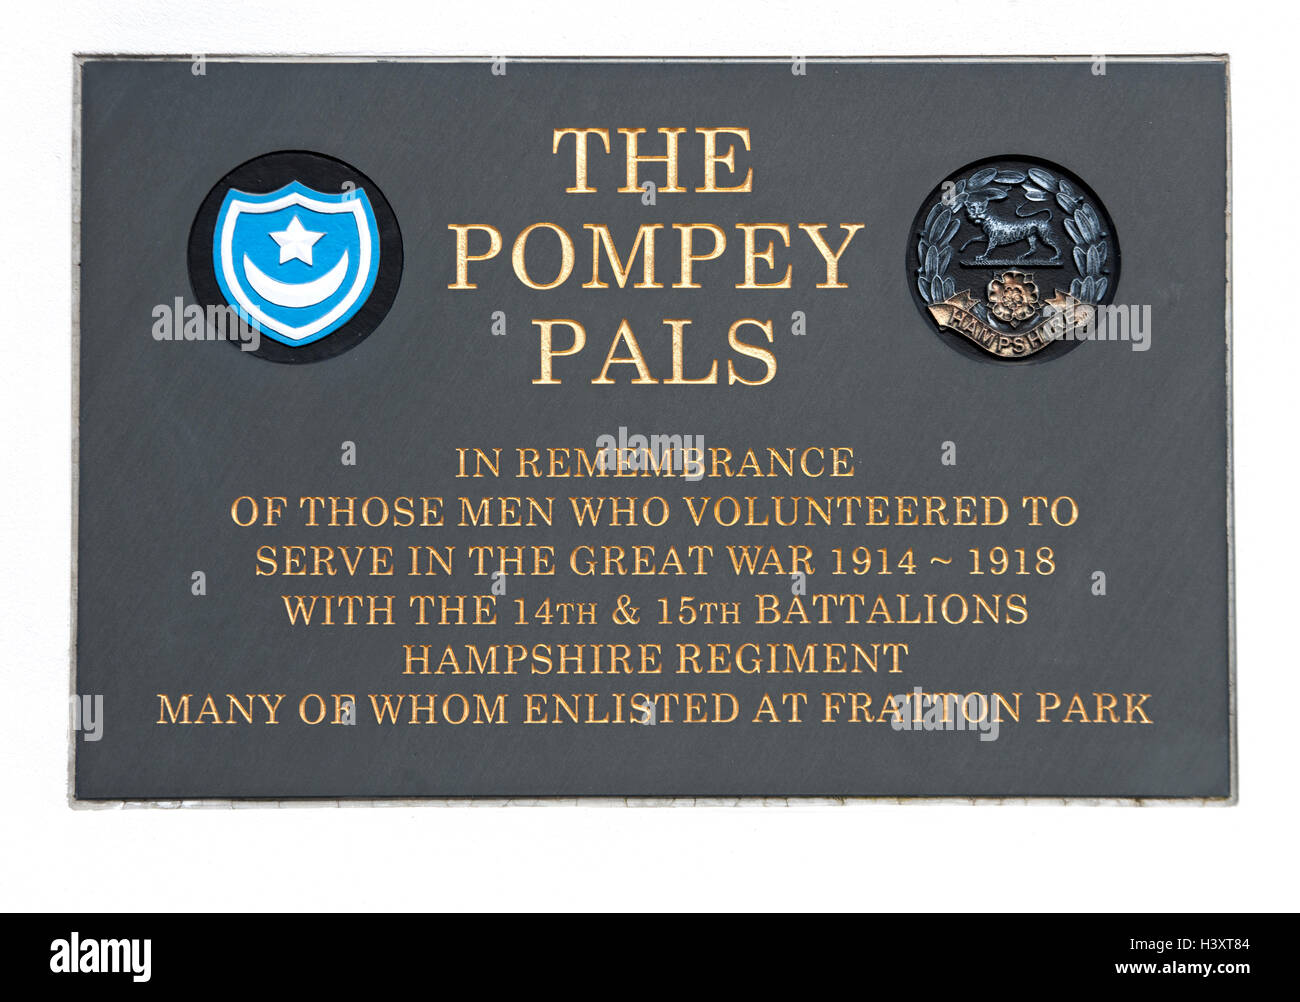 Plaque in remembrance of the Pompey's Pals on display at Fratton Park, Portsmouth Football Club, Portsmouth, Hampshire, UK. Stock Photo